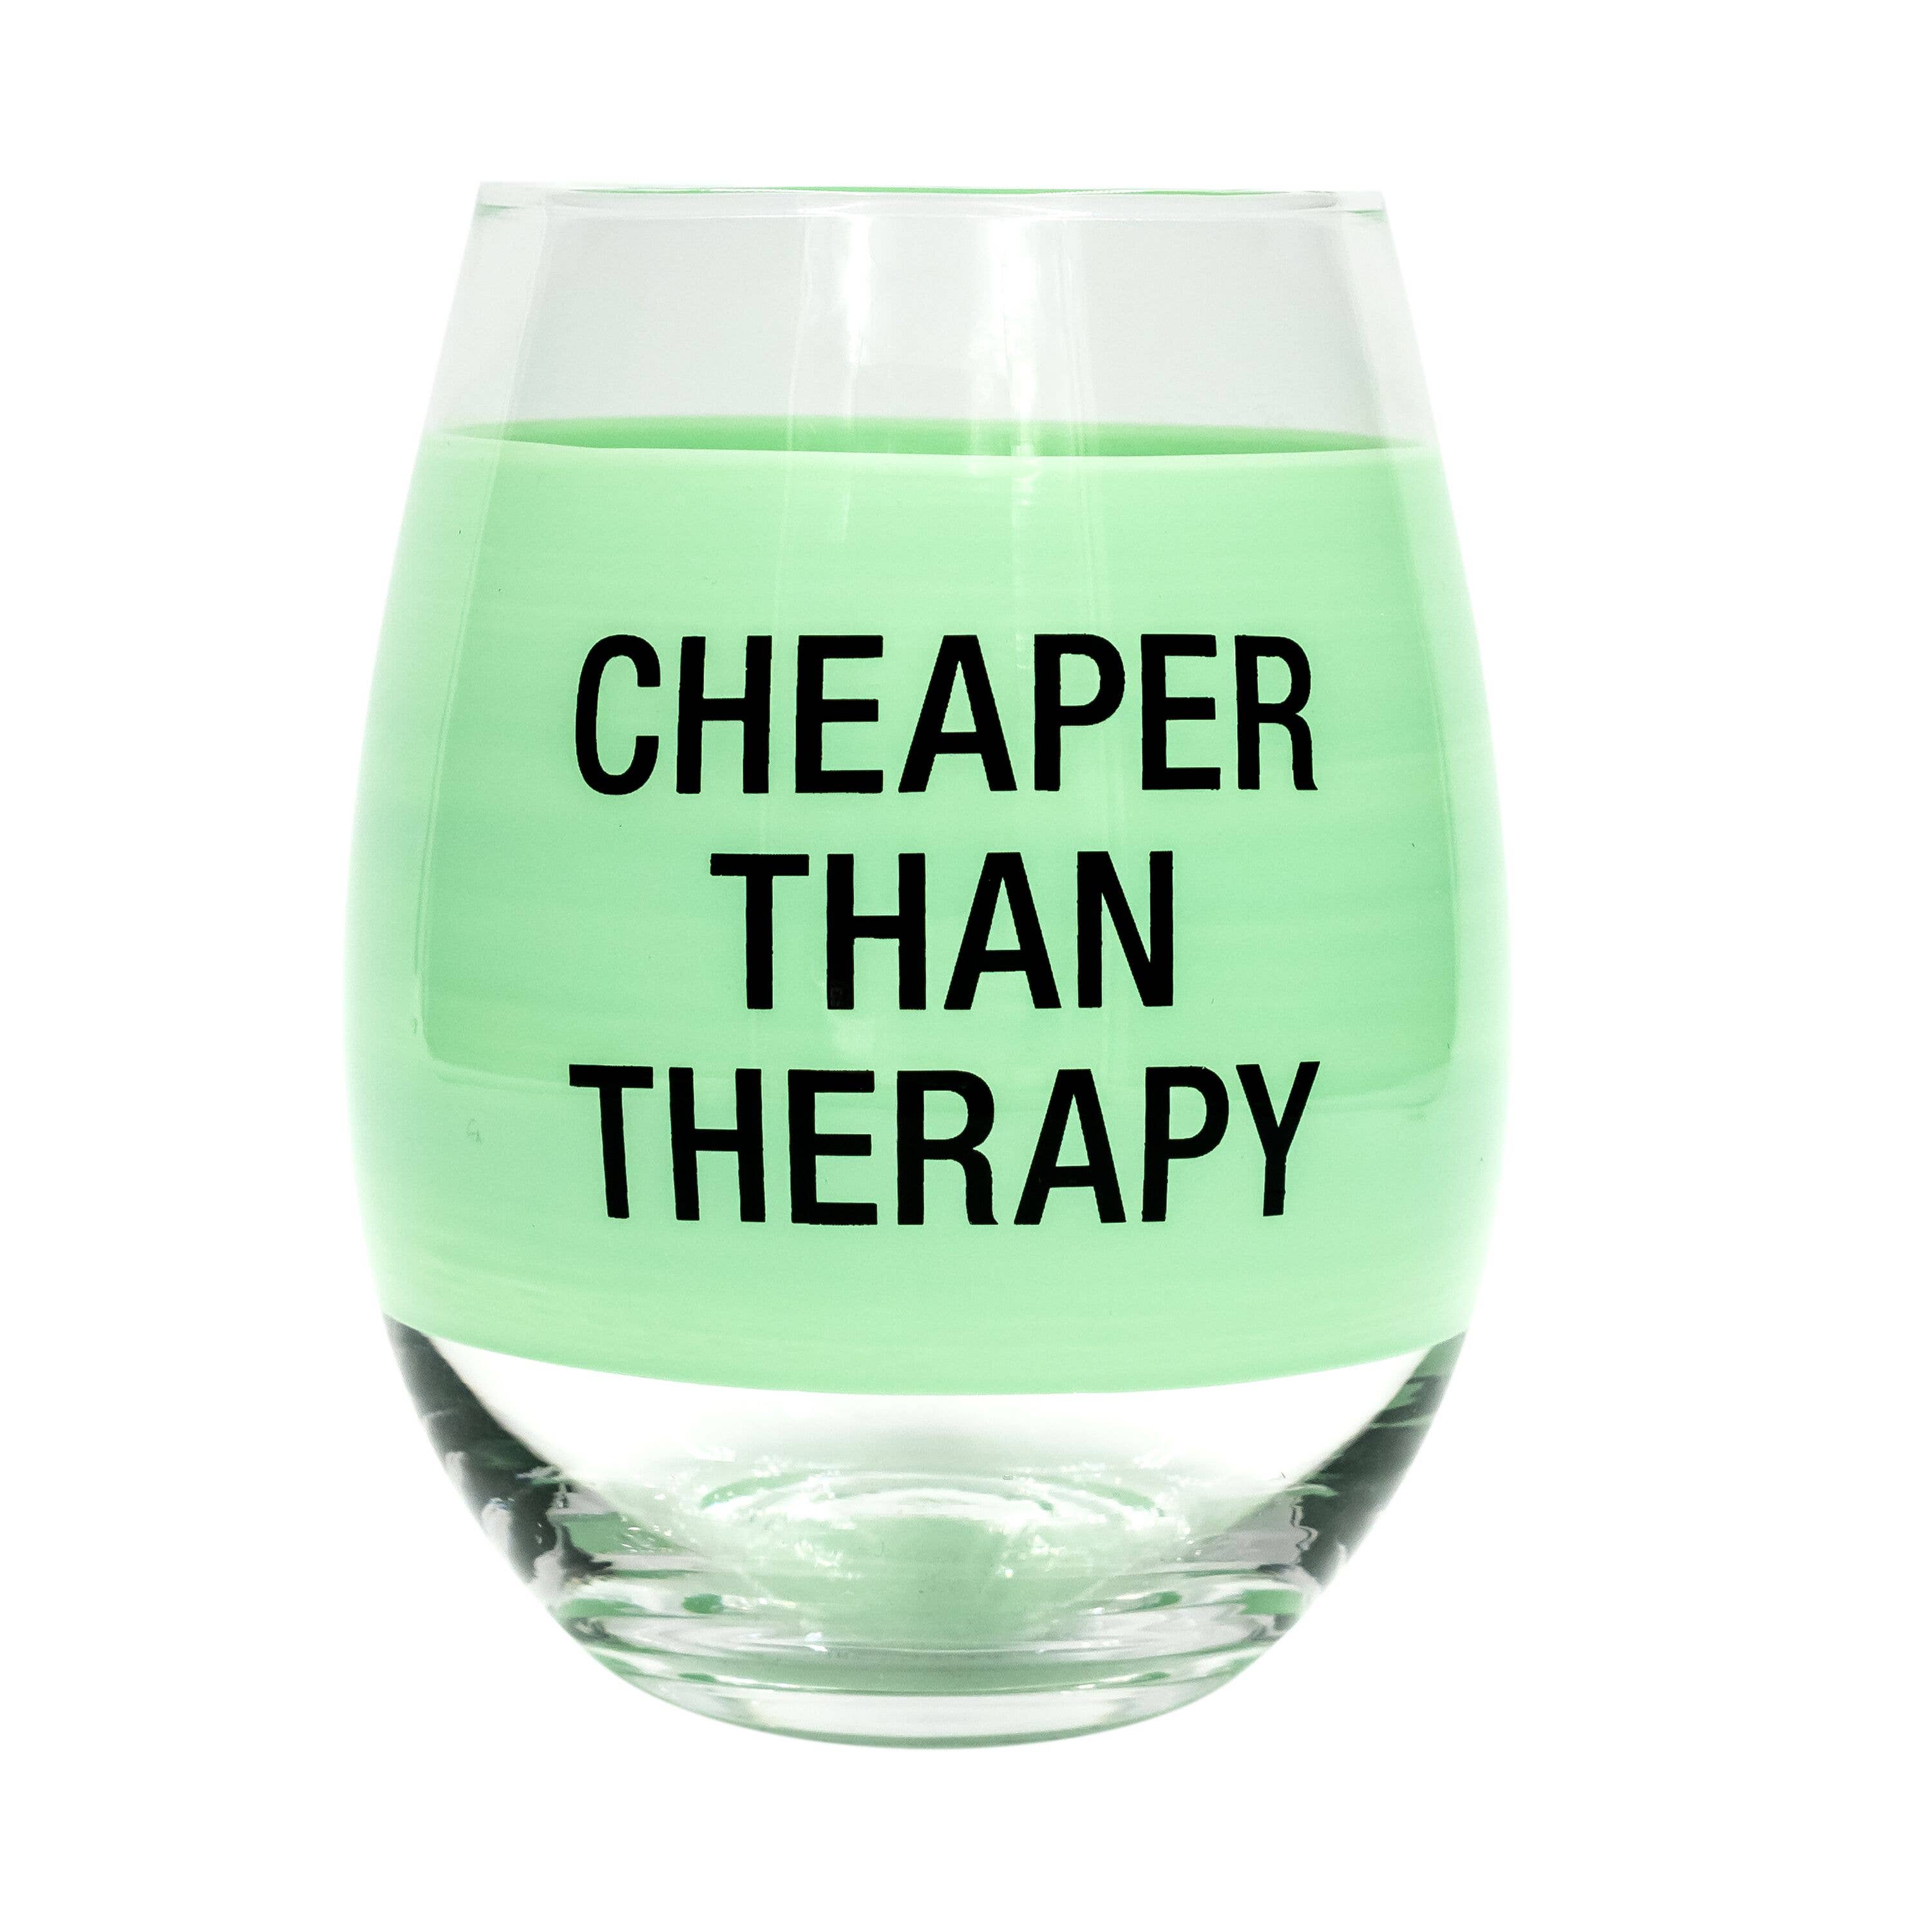 About Face Designs Inc. Therapy Wine Glass